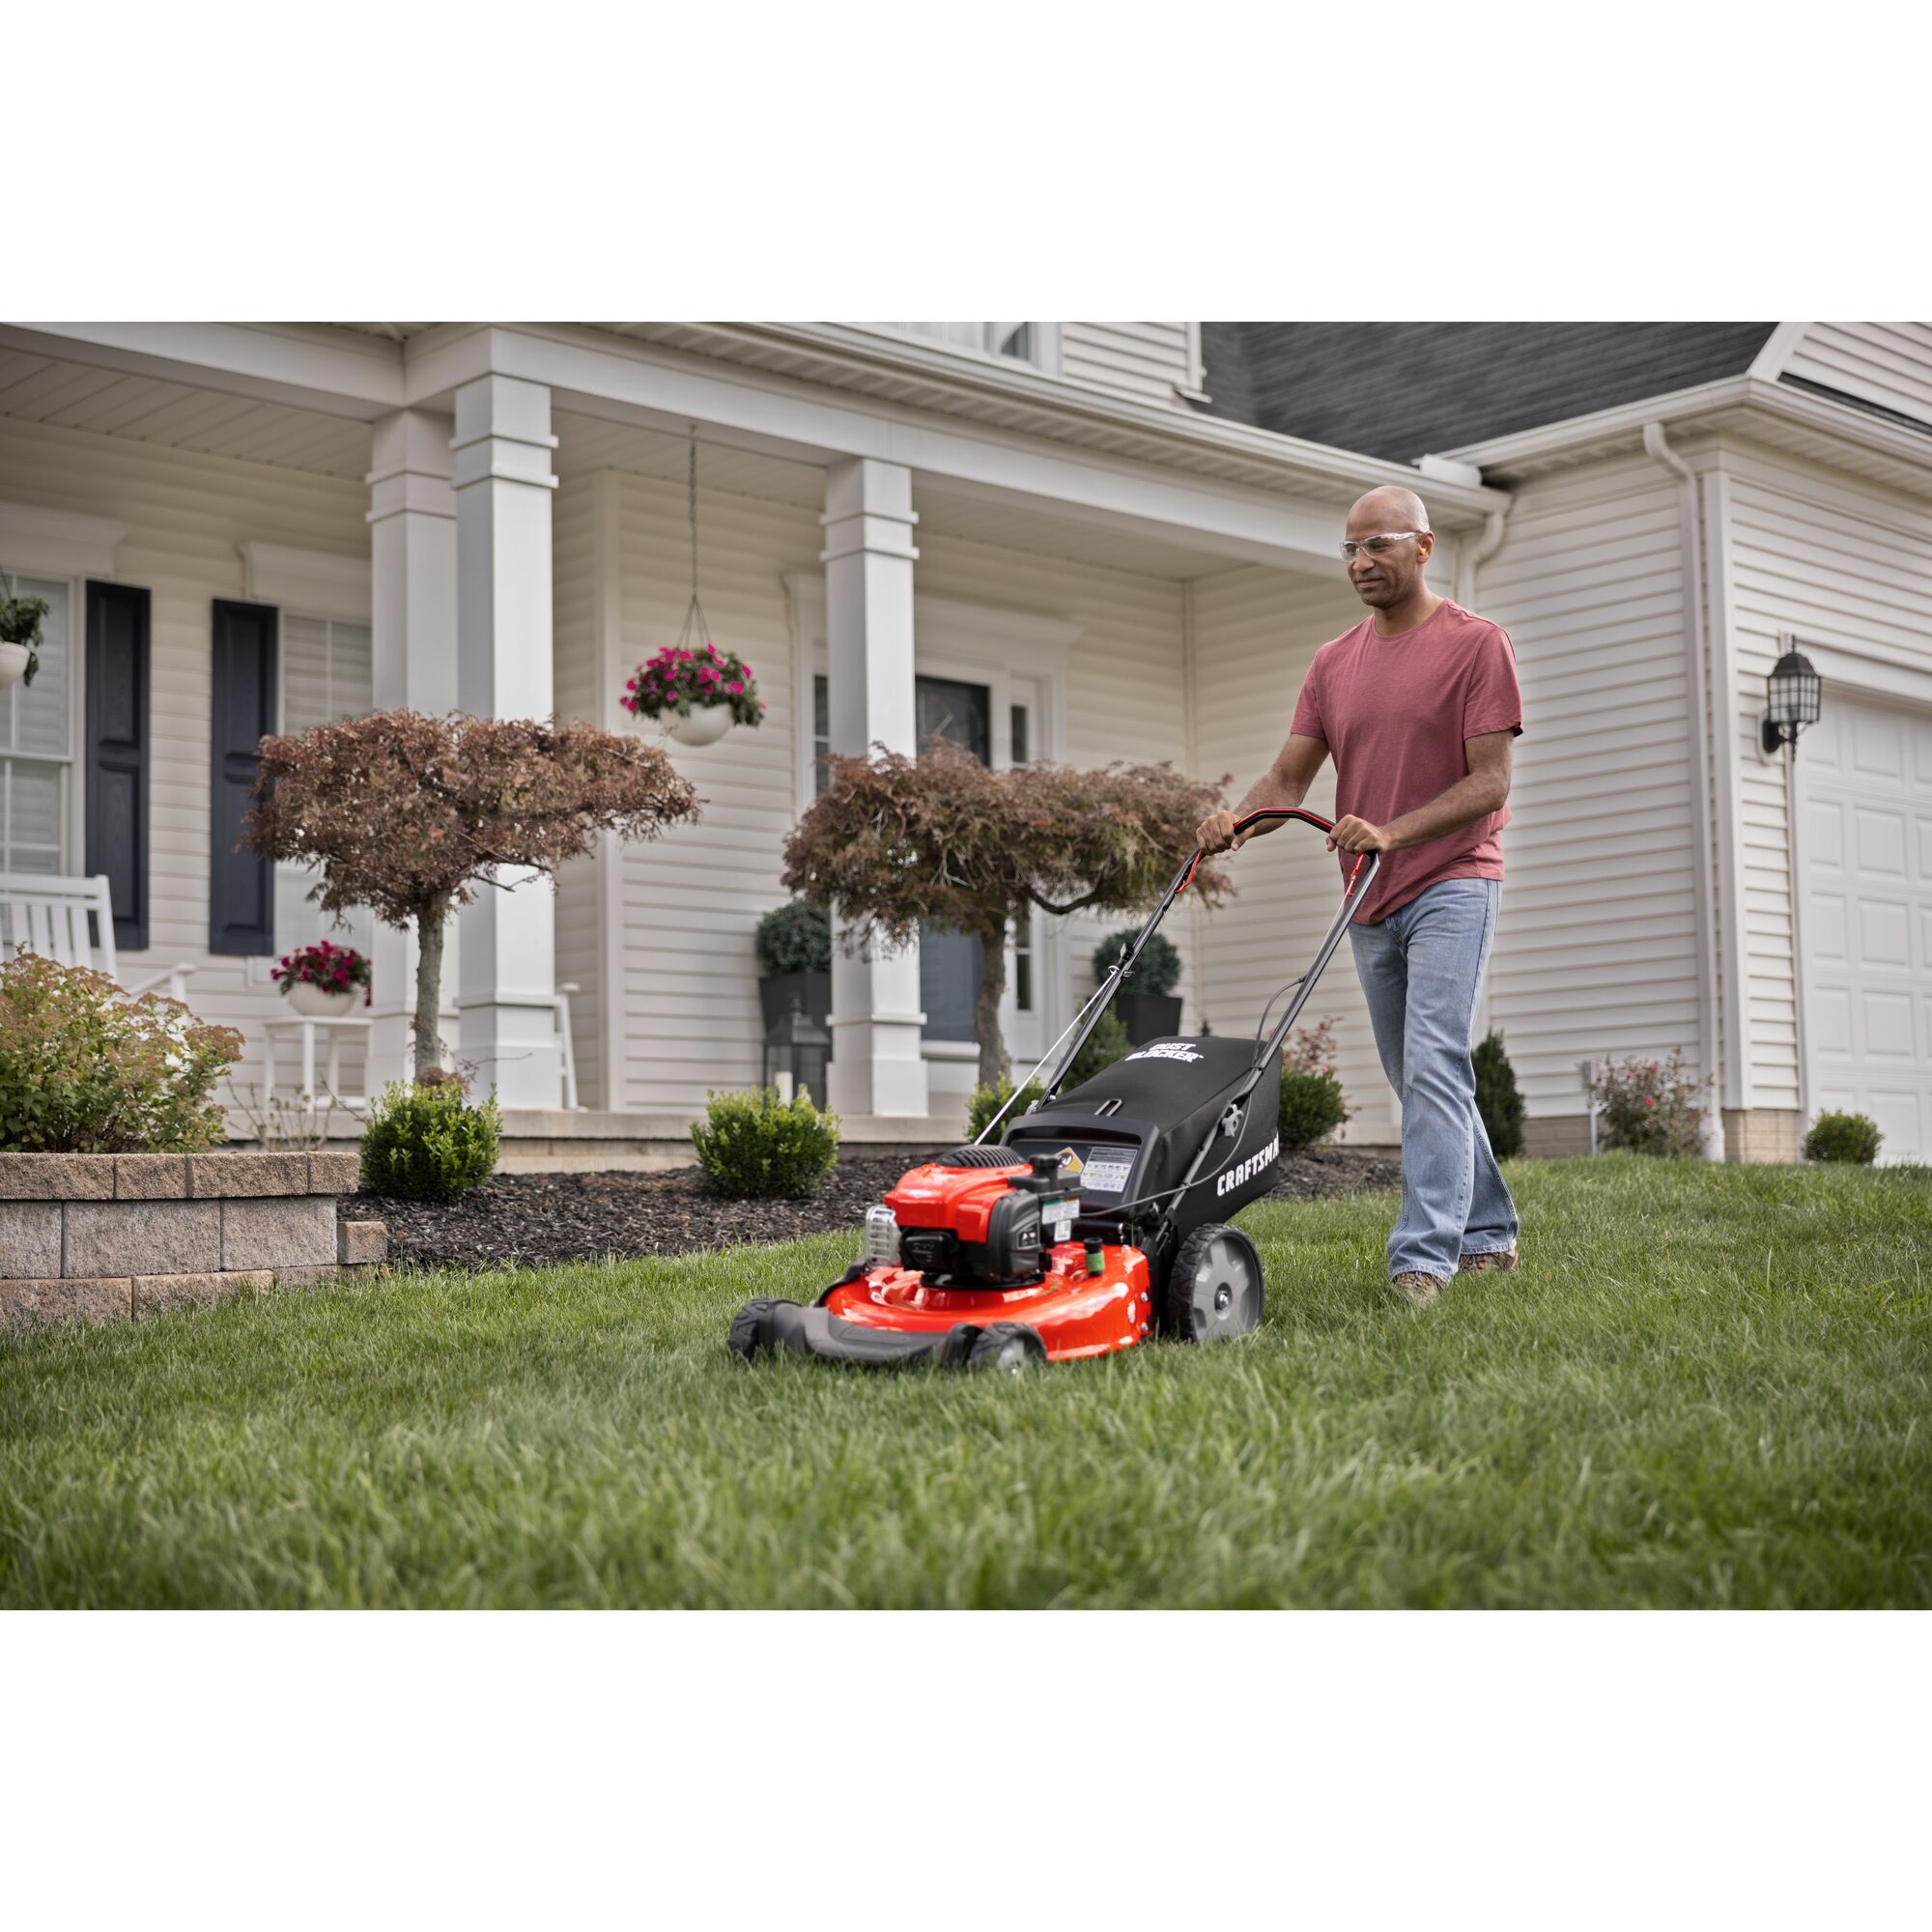 CRAFTSMAN 21-in 150cc Gas Push Mower mowing yard in front of house